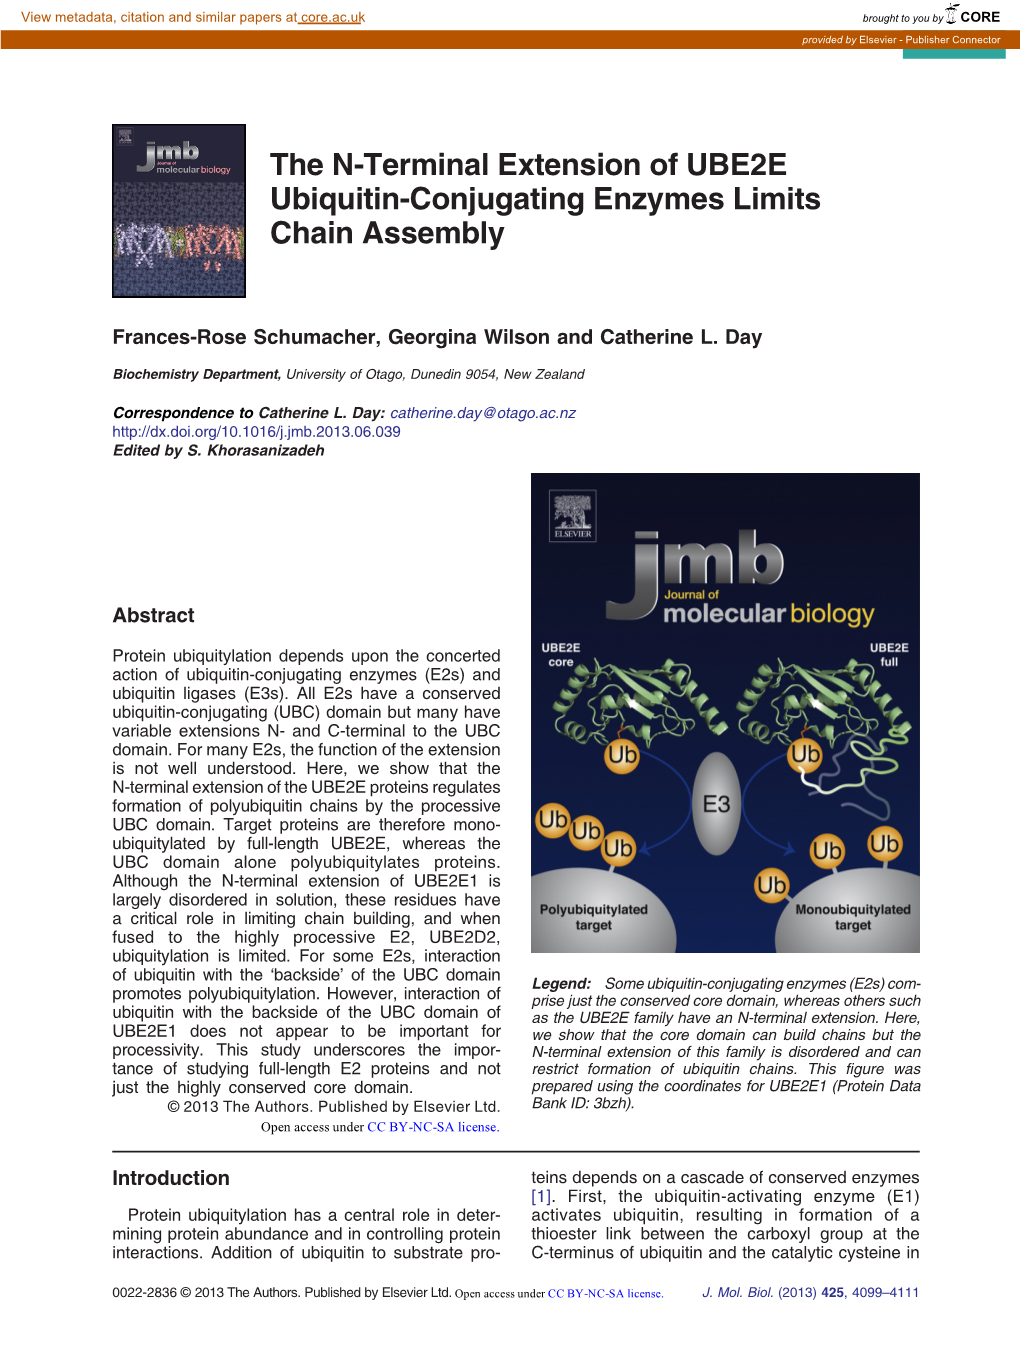 The N-Terminal Extension of UBE2E Ubiquitin-Conjugating Enzymes Limits Chain Assembly